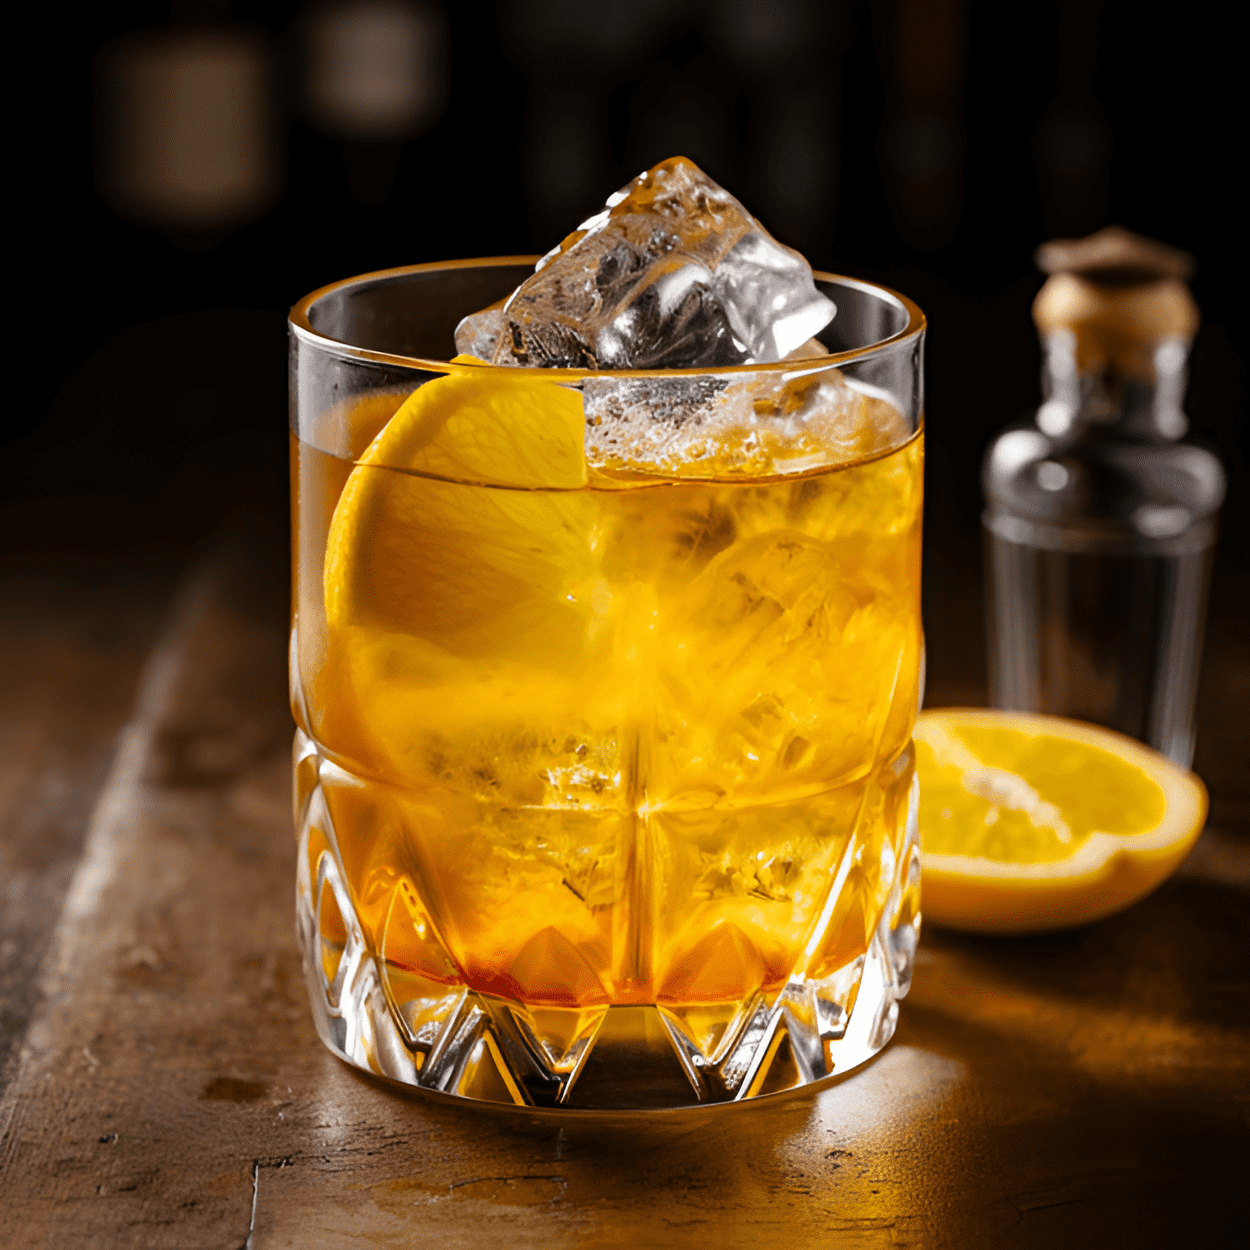 Cowboy Cocktail Recipe - The Cowboy Cocktail is a robust, full-bodied drink with a strong, smooth bourbon base. The simple syrup adds a touch of sweetness, while the lemon juice brings a hint of tartness, creating a well-balanced, refreshing taste.